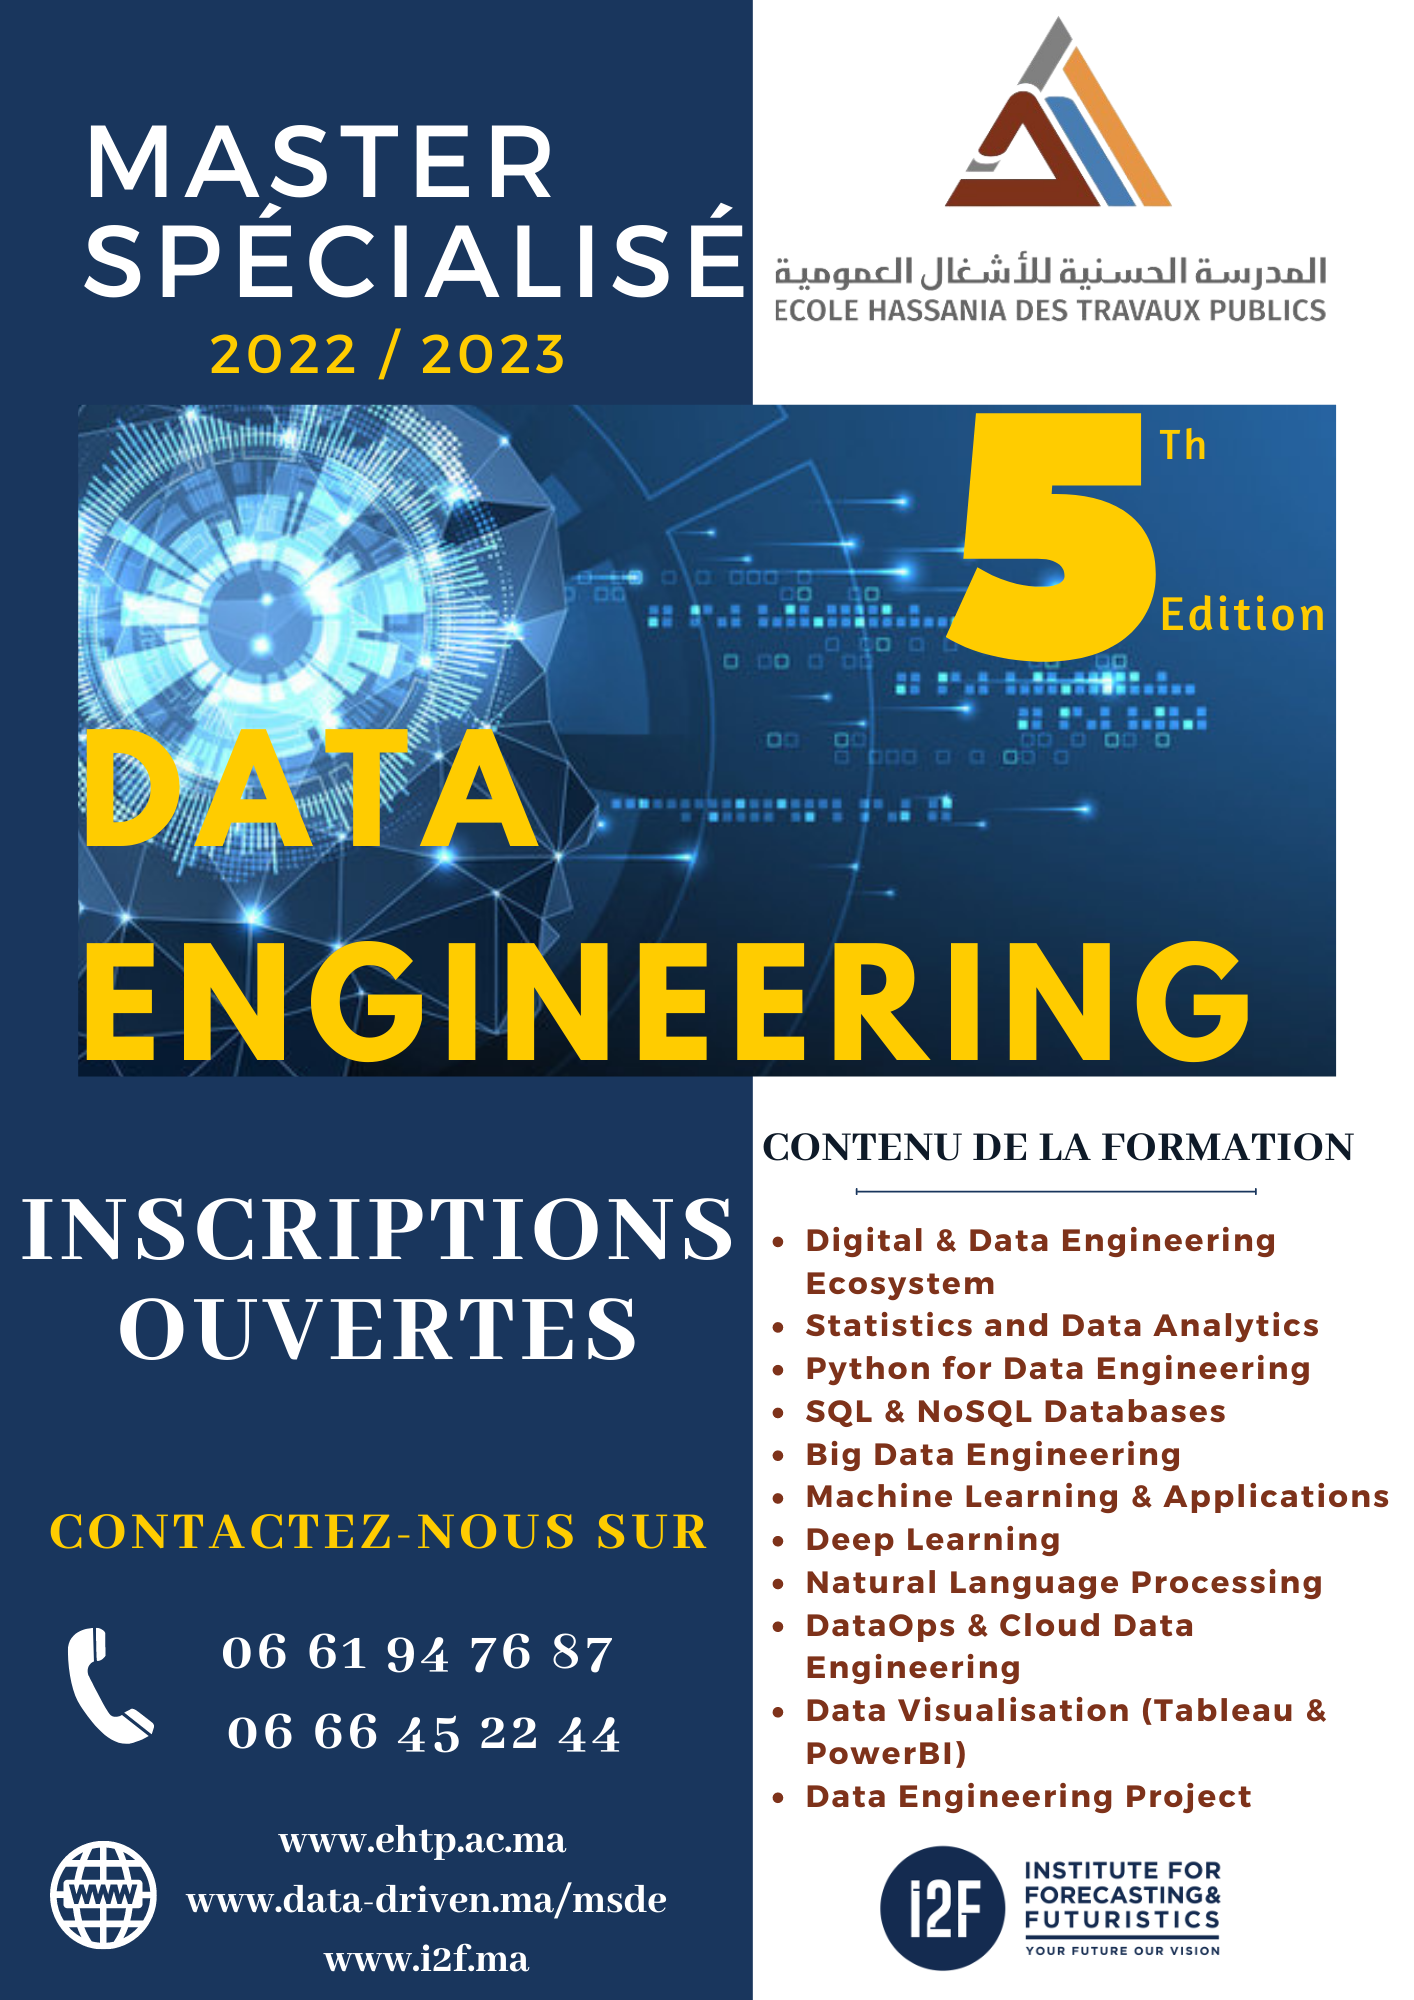 Plaquette Edition 5 MSE Data Engineeirng 23 11 2022